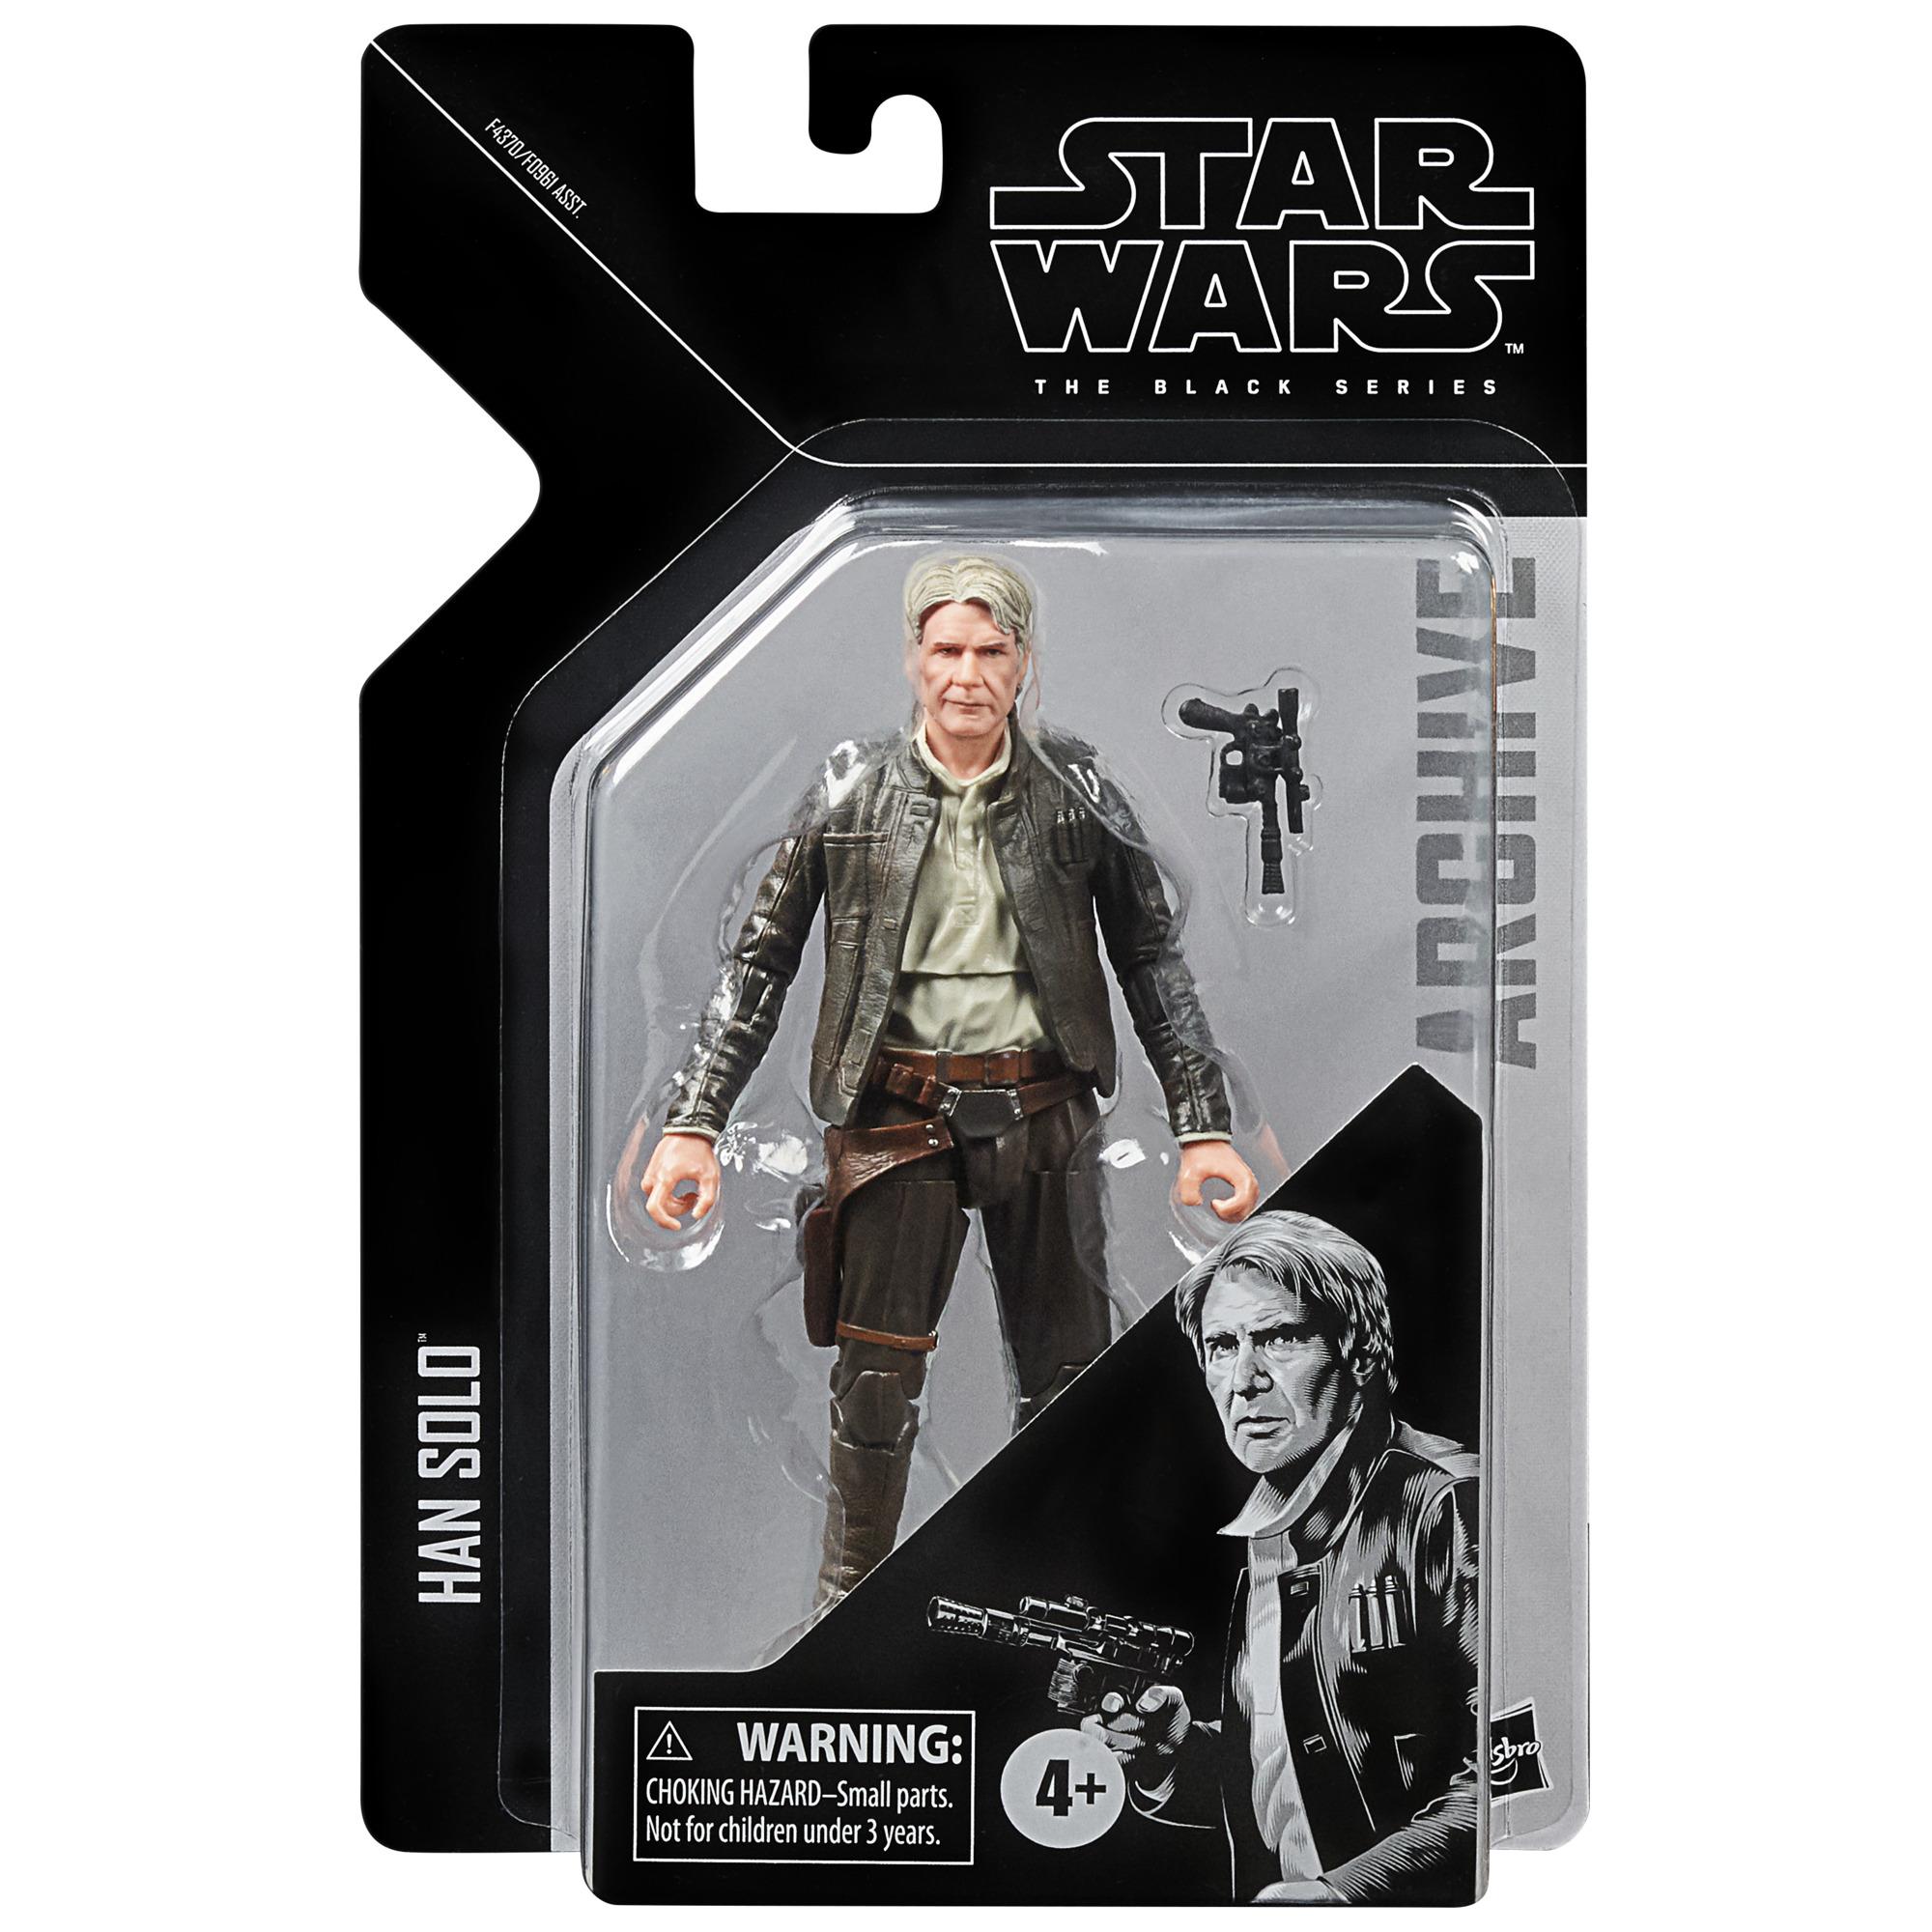 Details about   Star Wars The Black Series 3.75" Inch HAN SOLO Figure from The Force Awakens 